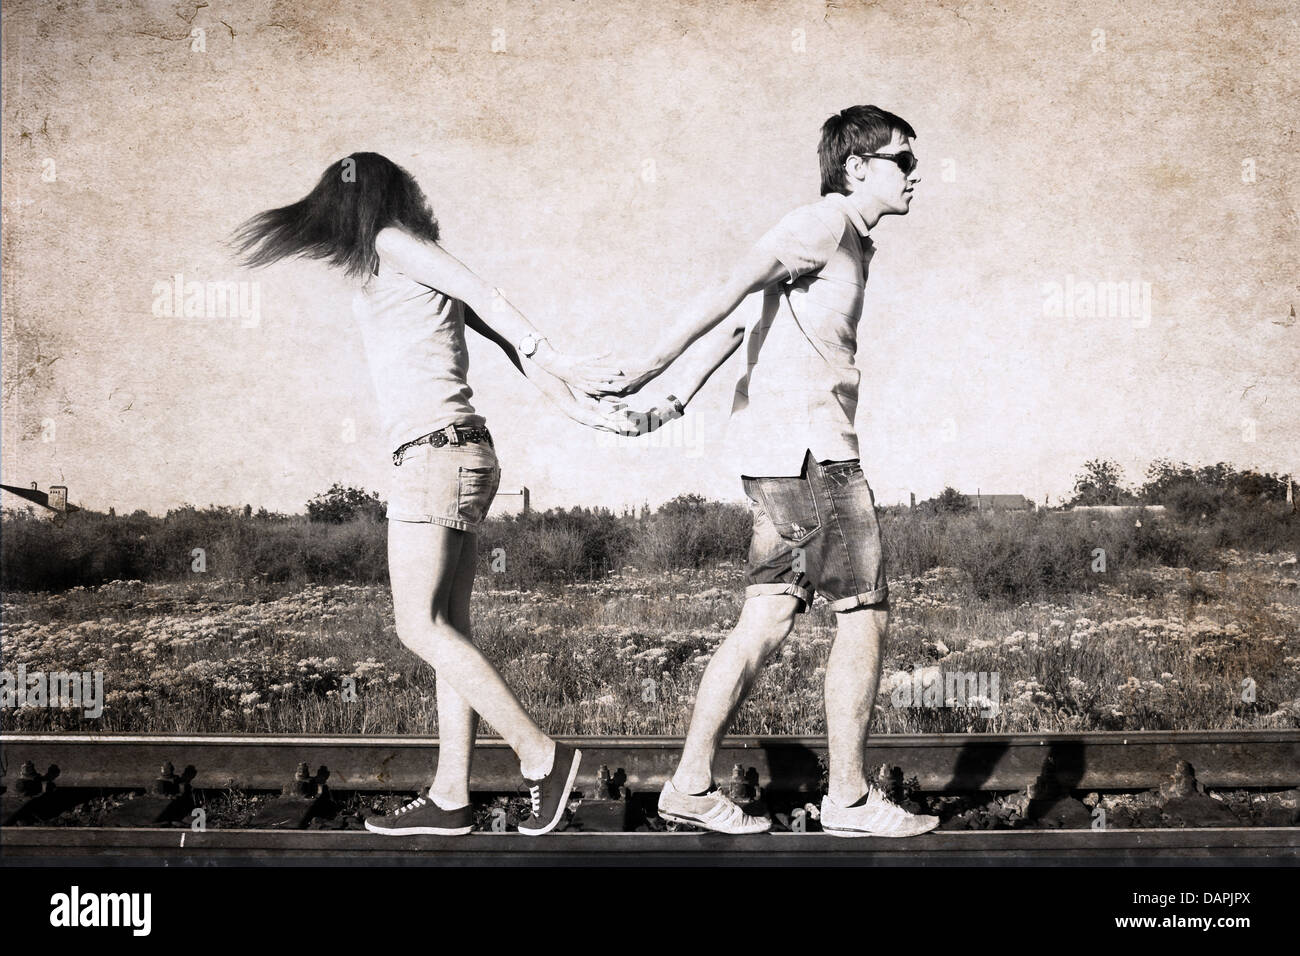 artwork in retro style, difficulties in relationships Stock Photo